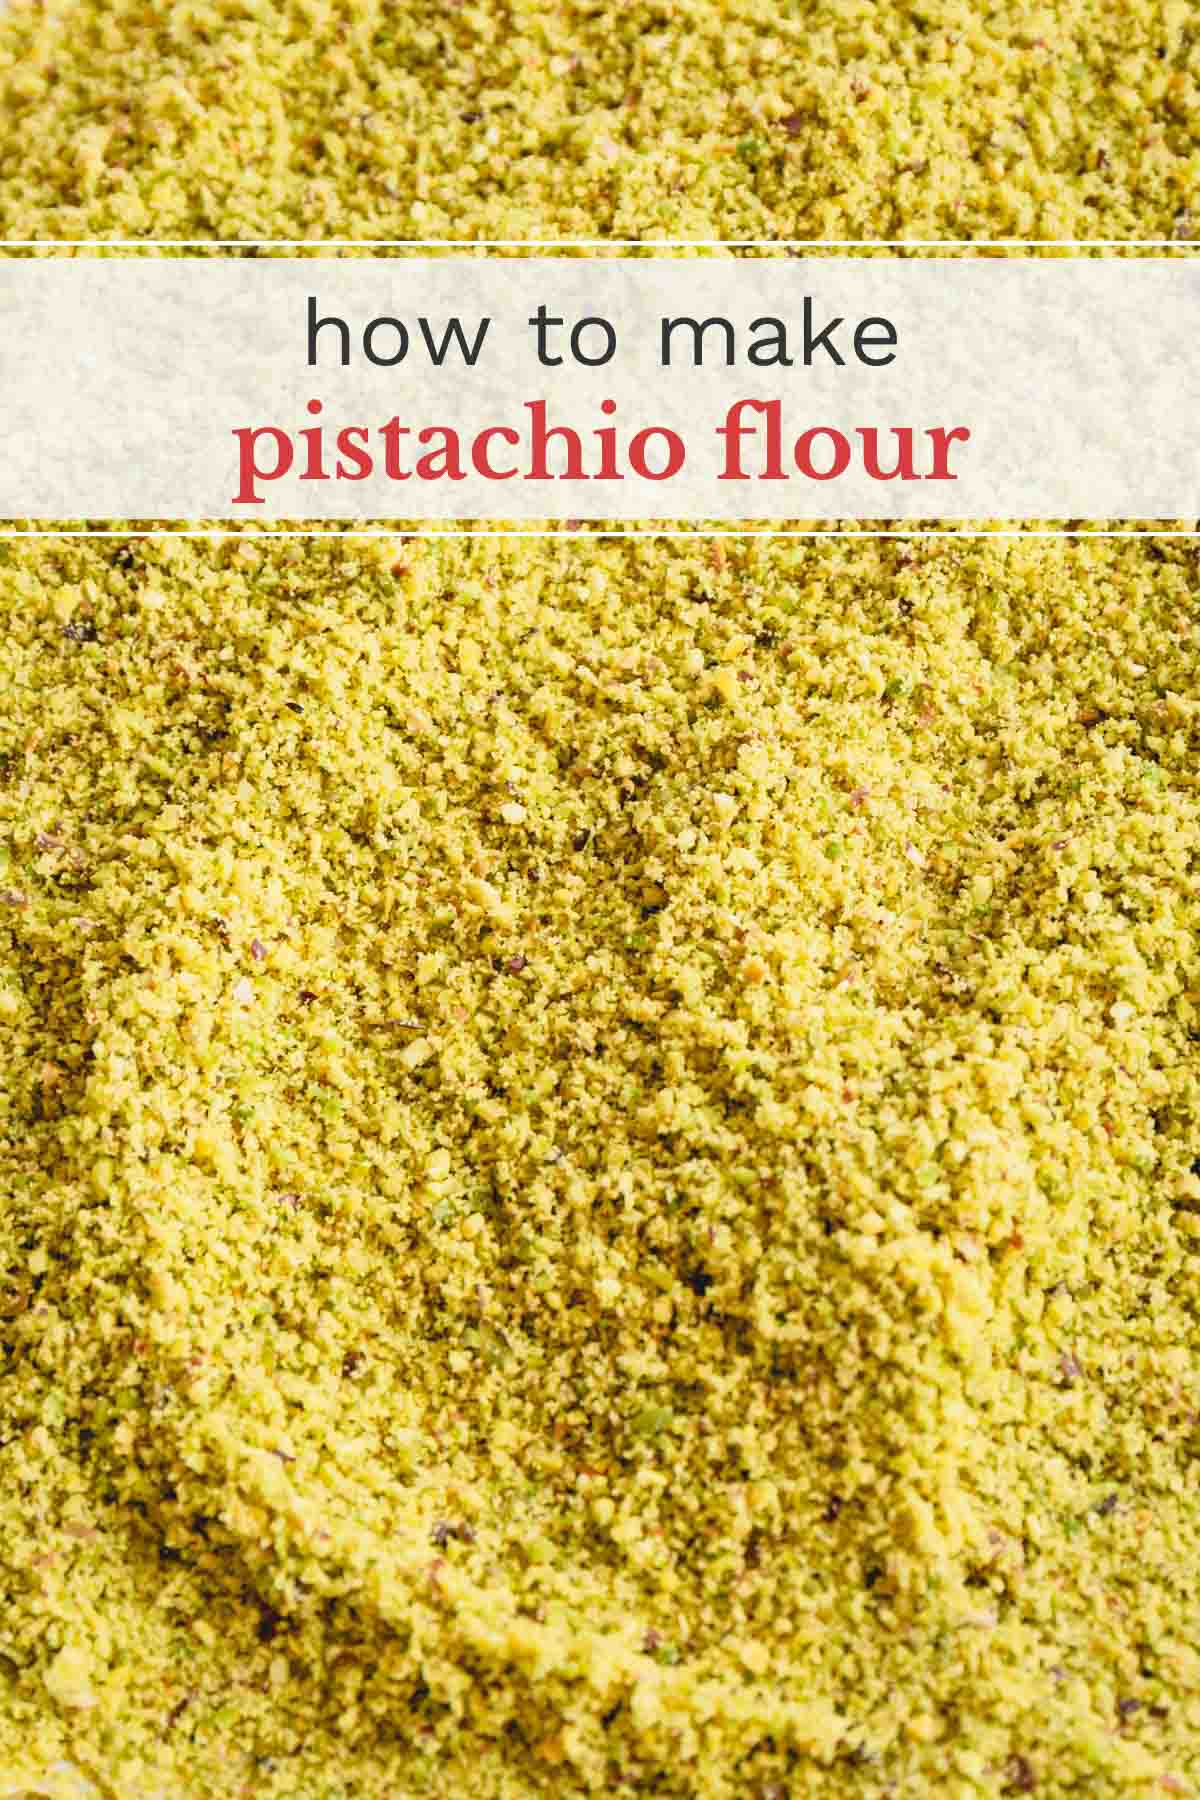 An image of pistachio flour with a banner that reads, "how to make pistachio flour".